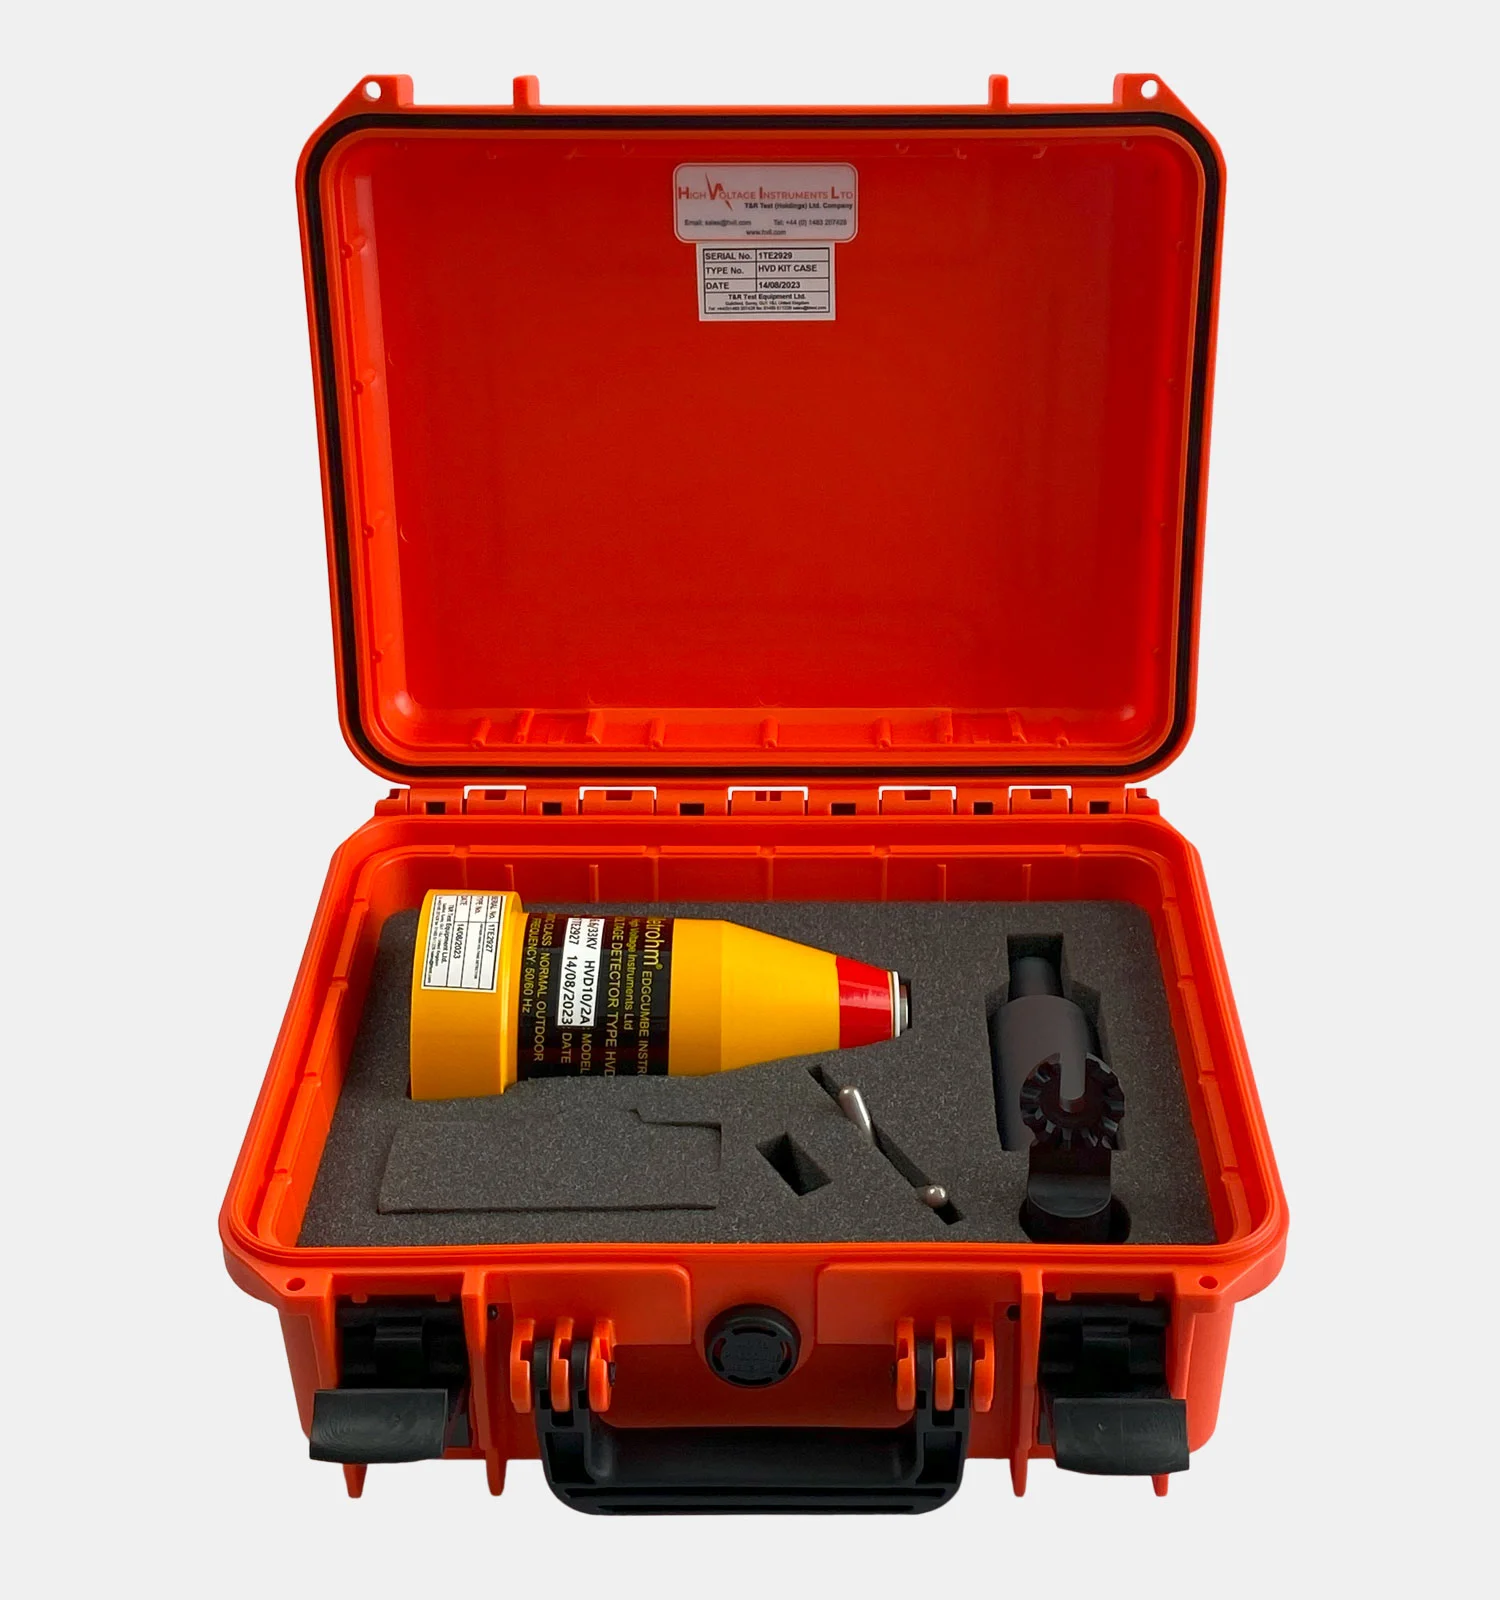 Suppliers of HVD10/2A High Voltage Detector Kit UK